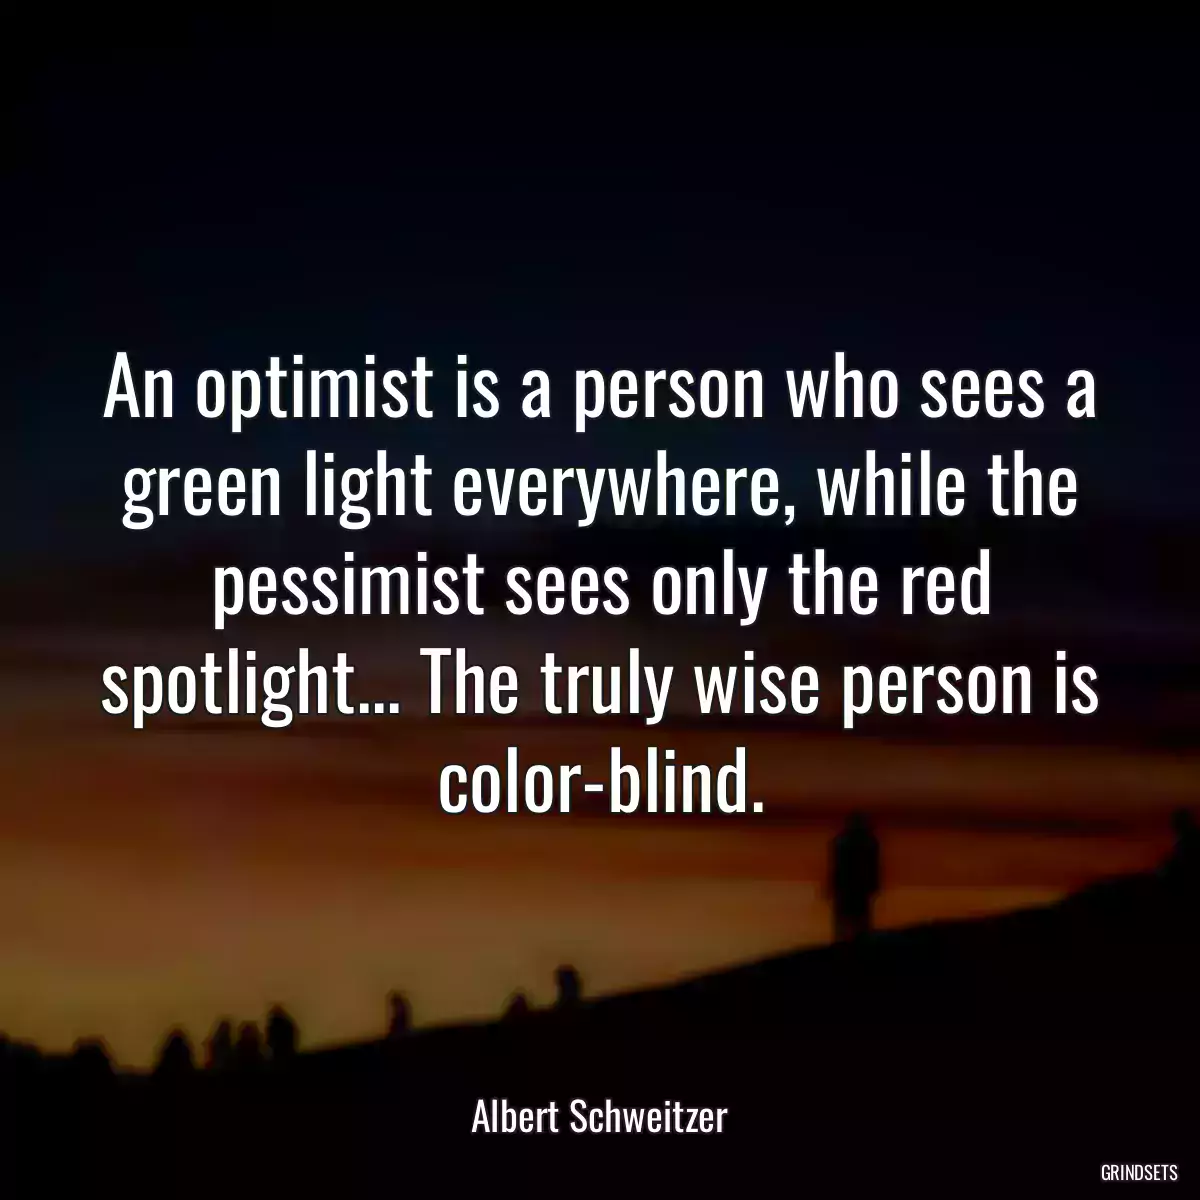 An optimist is a person who sees a green light everywhere, while the pessimist sees only the red spotlight... The truly wise person is color-blind.